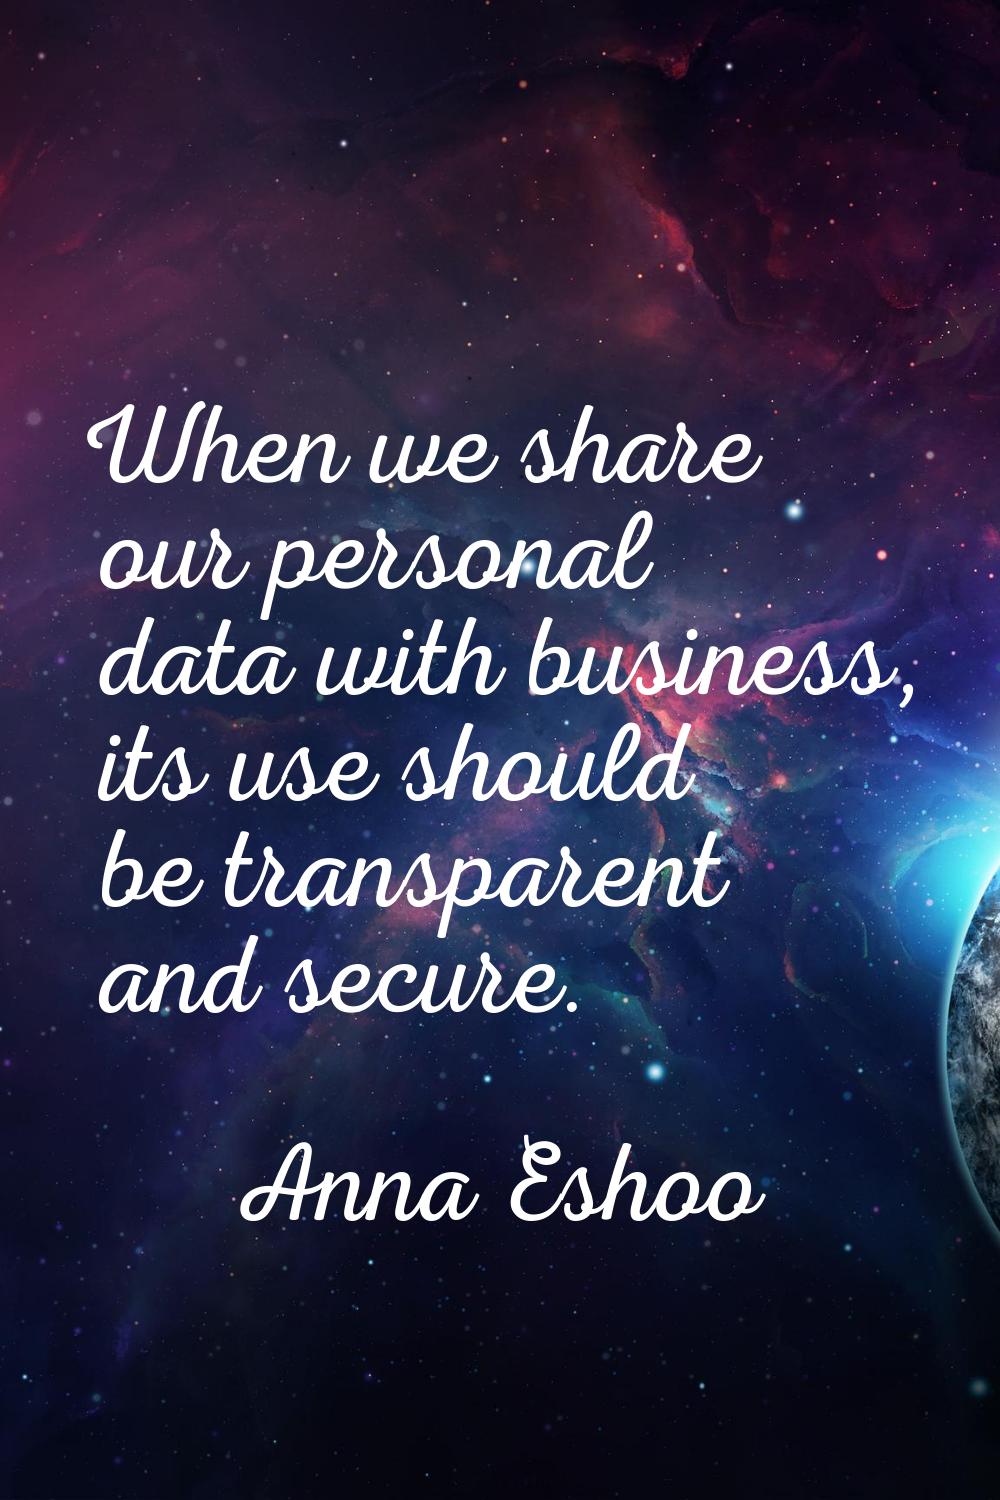 When we share our personal data with business, its use should be transparent and secure.